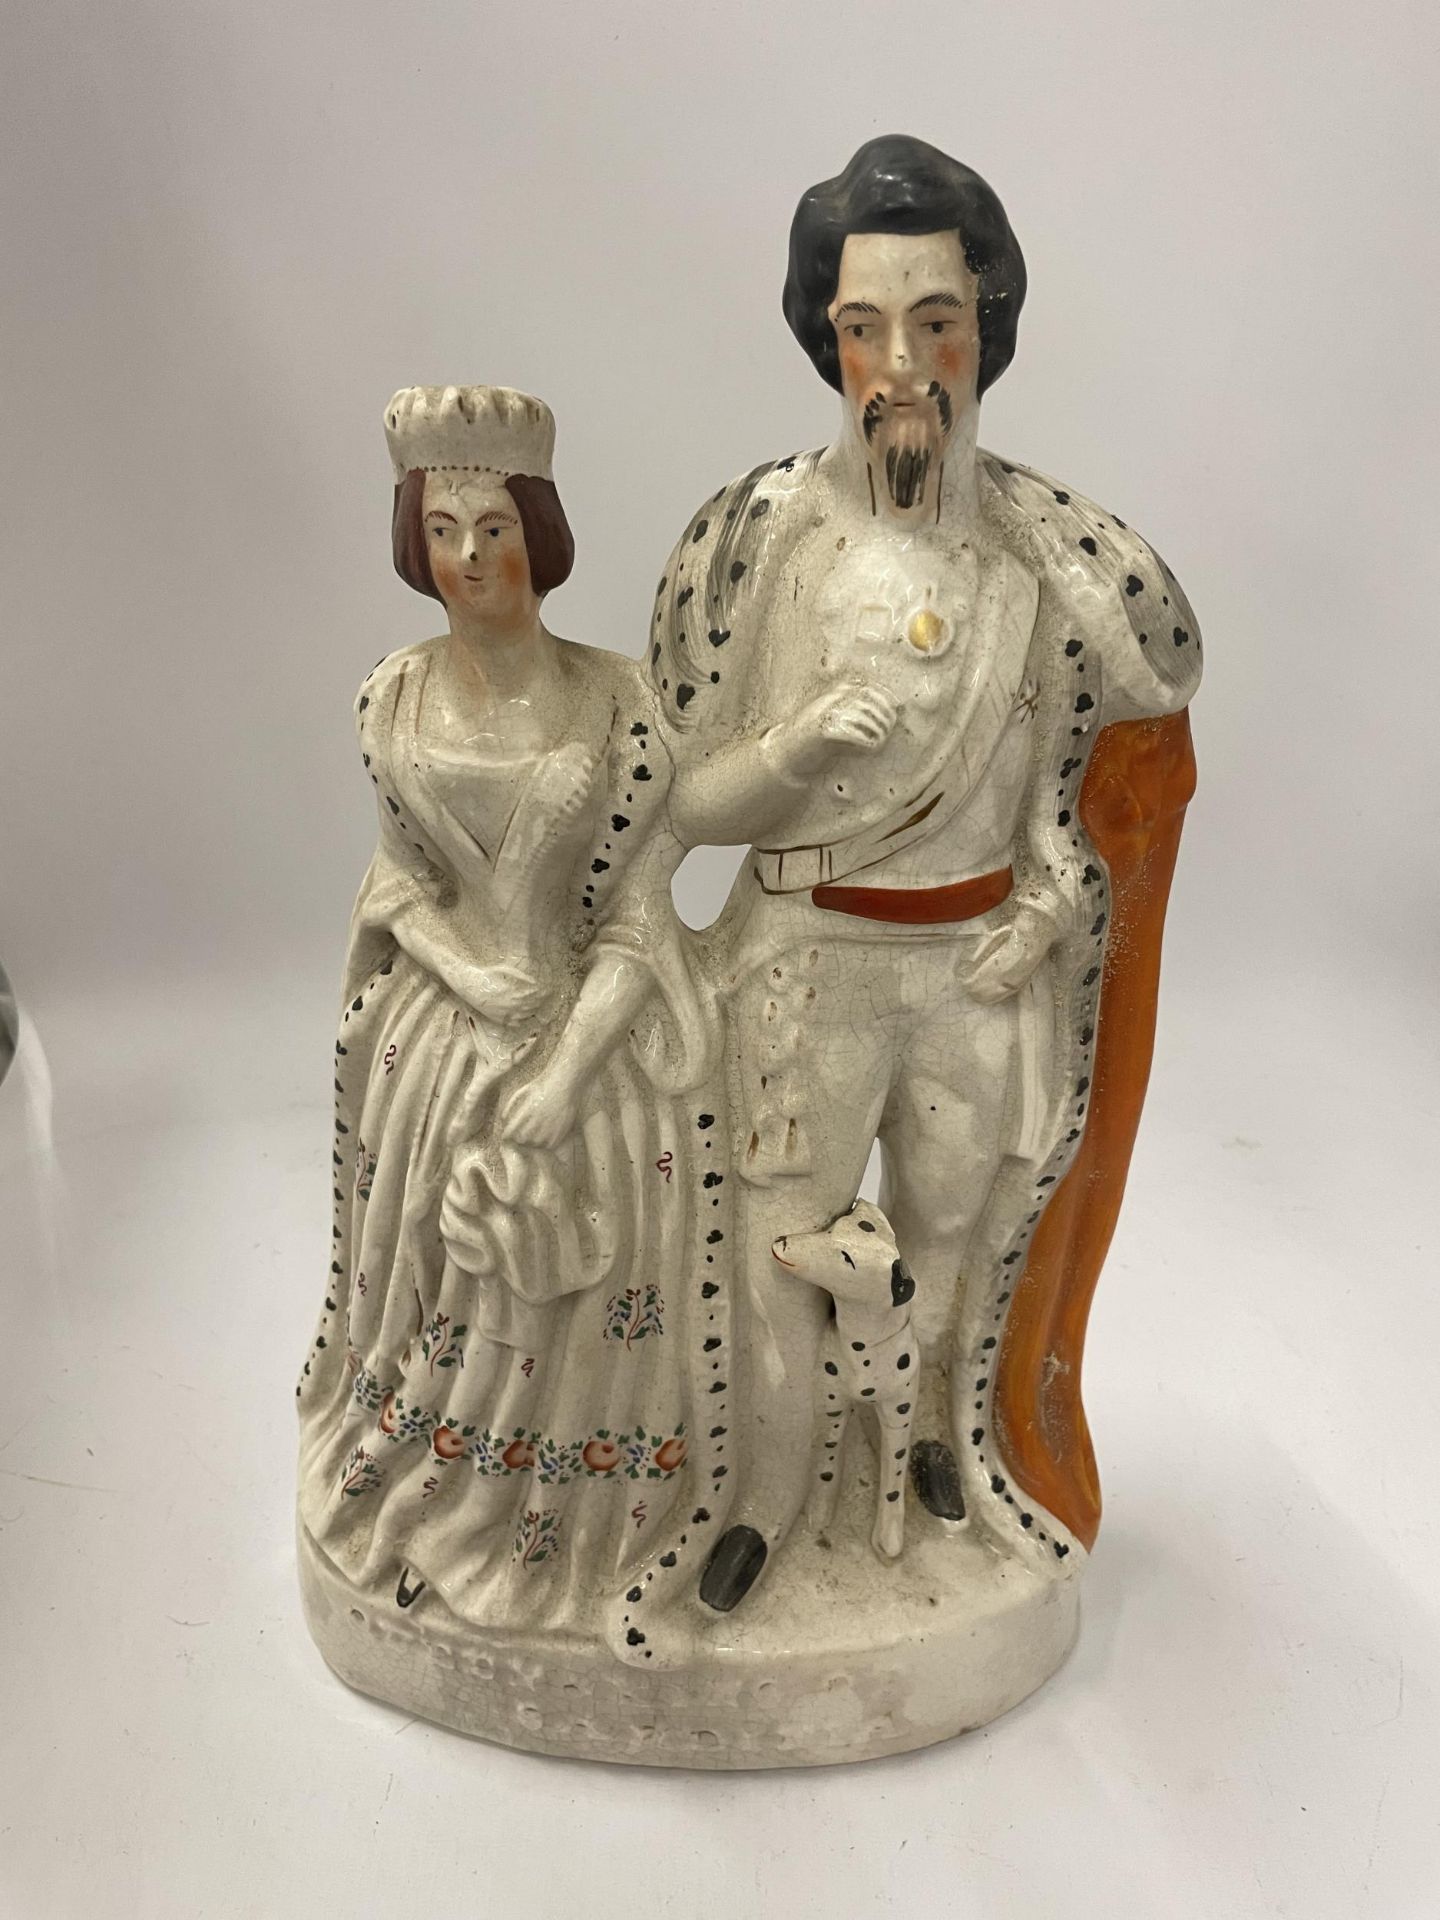 A STAFFORDSHIRE POTTERY FIGURE OF QUEEN VICTORIA AND VICTOR EMMANUEL II, QUEEN & KING OF SARDINIA